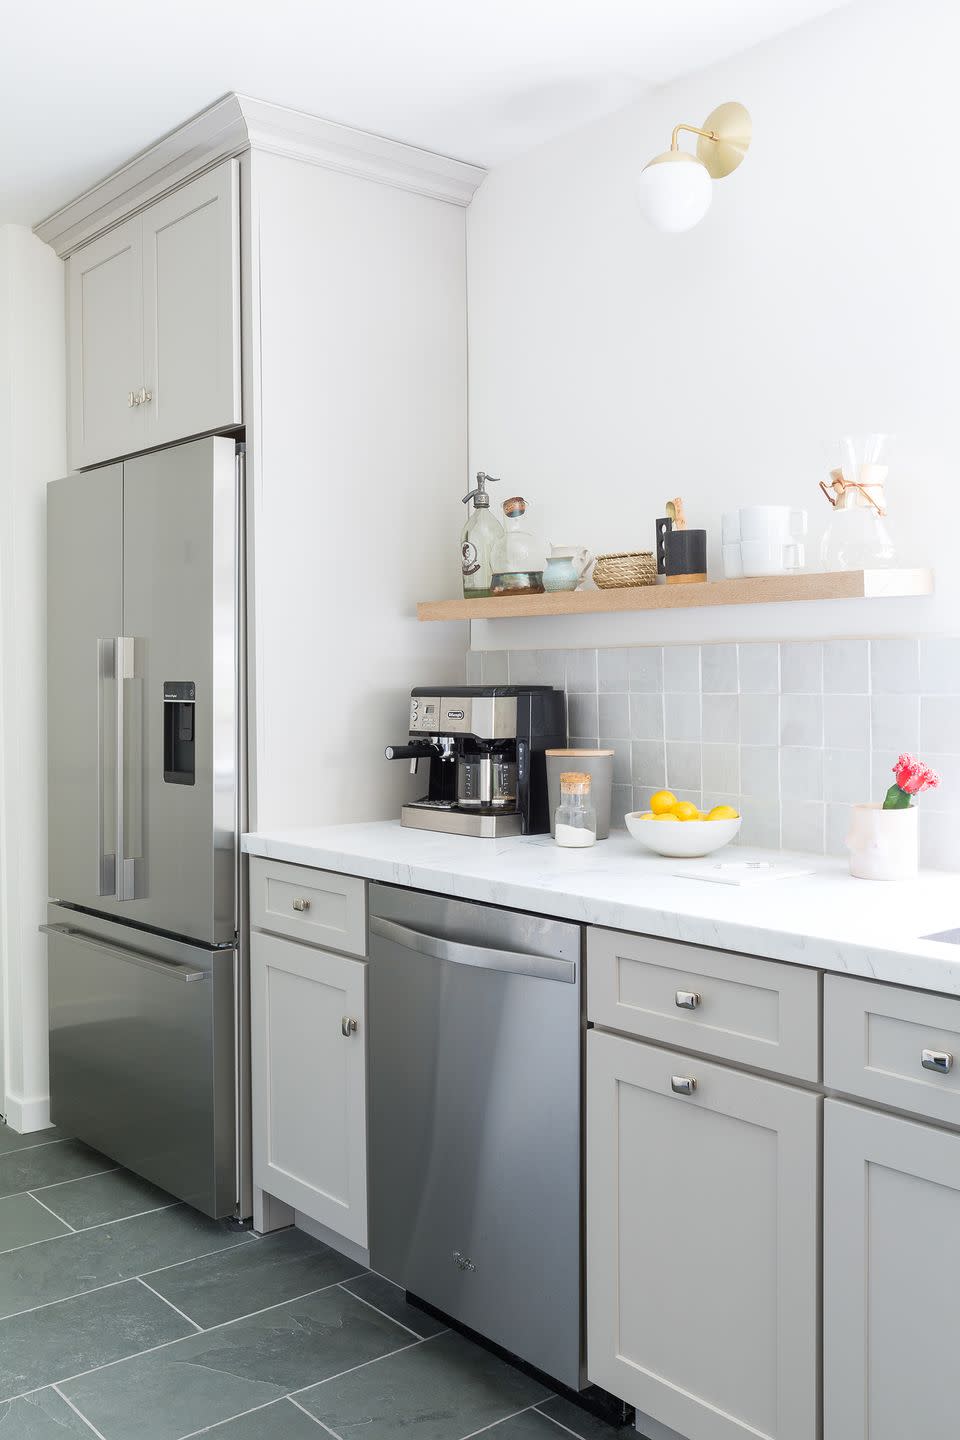 <p>Aisling wanted to use materials and finishes that would last a lifetime (read: no super trendy stuff), like the stainless steel sink and classic white tiles.</p>